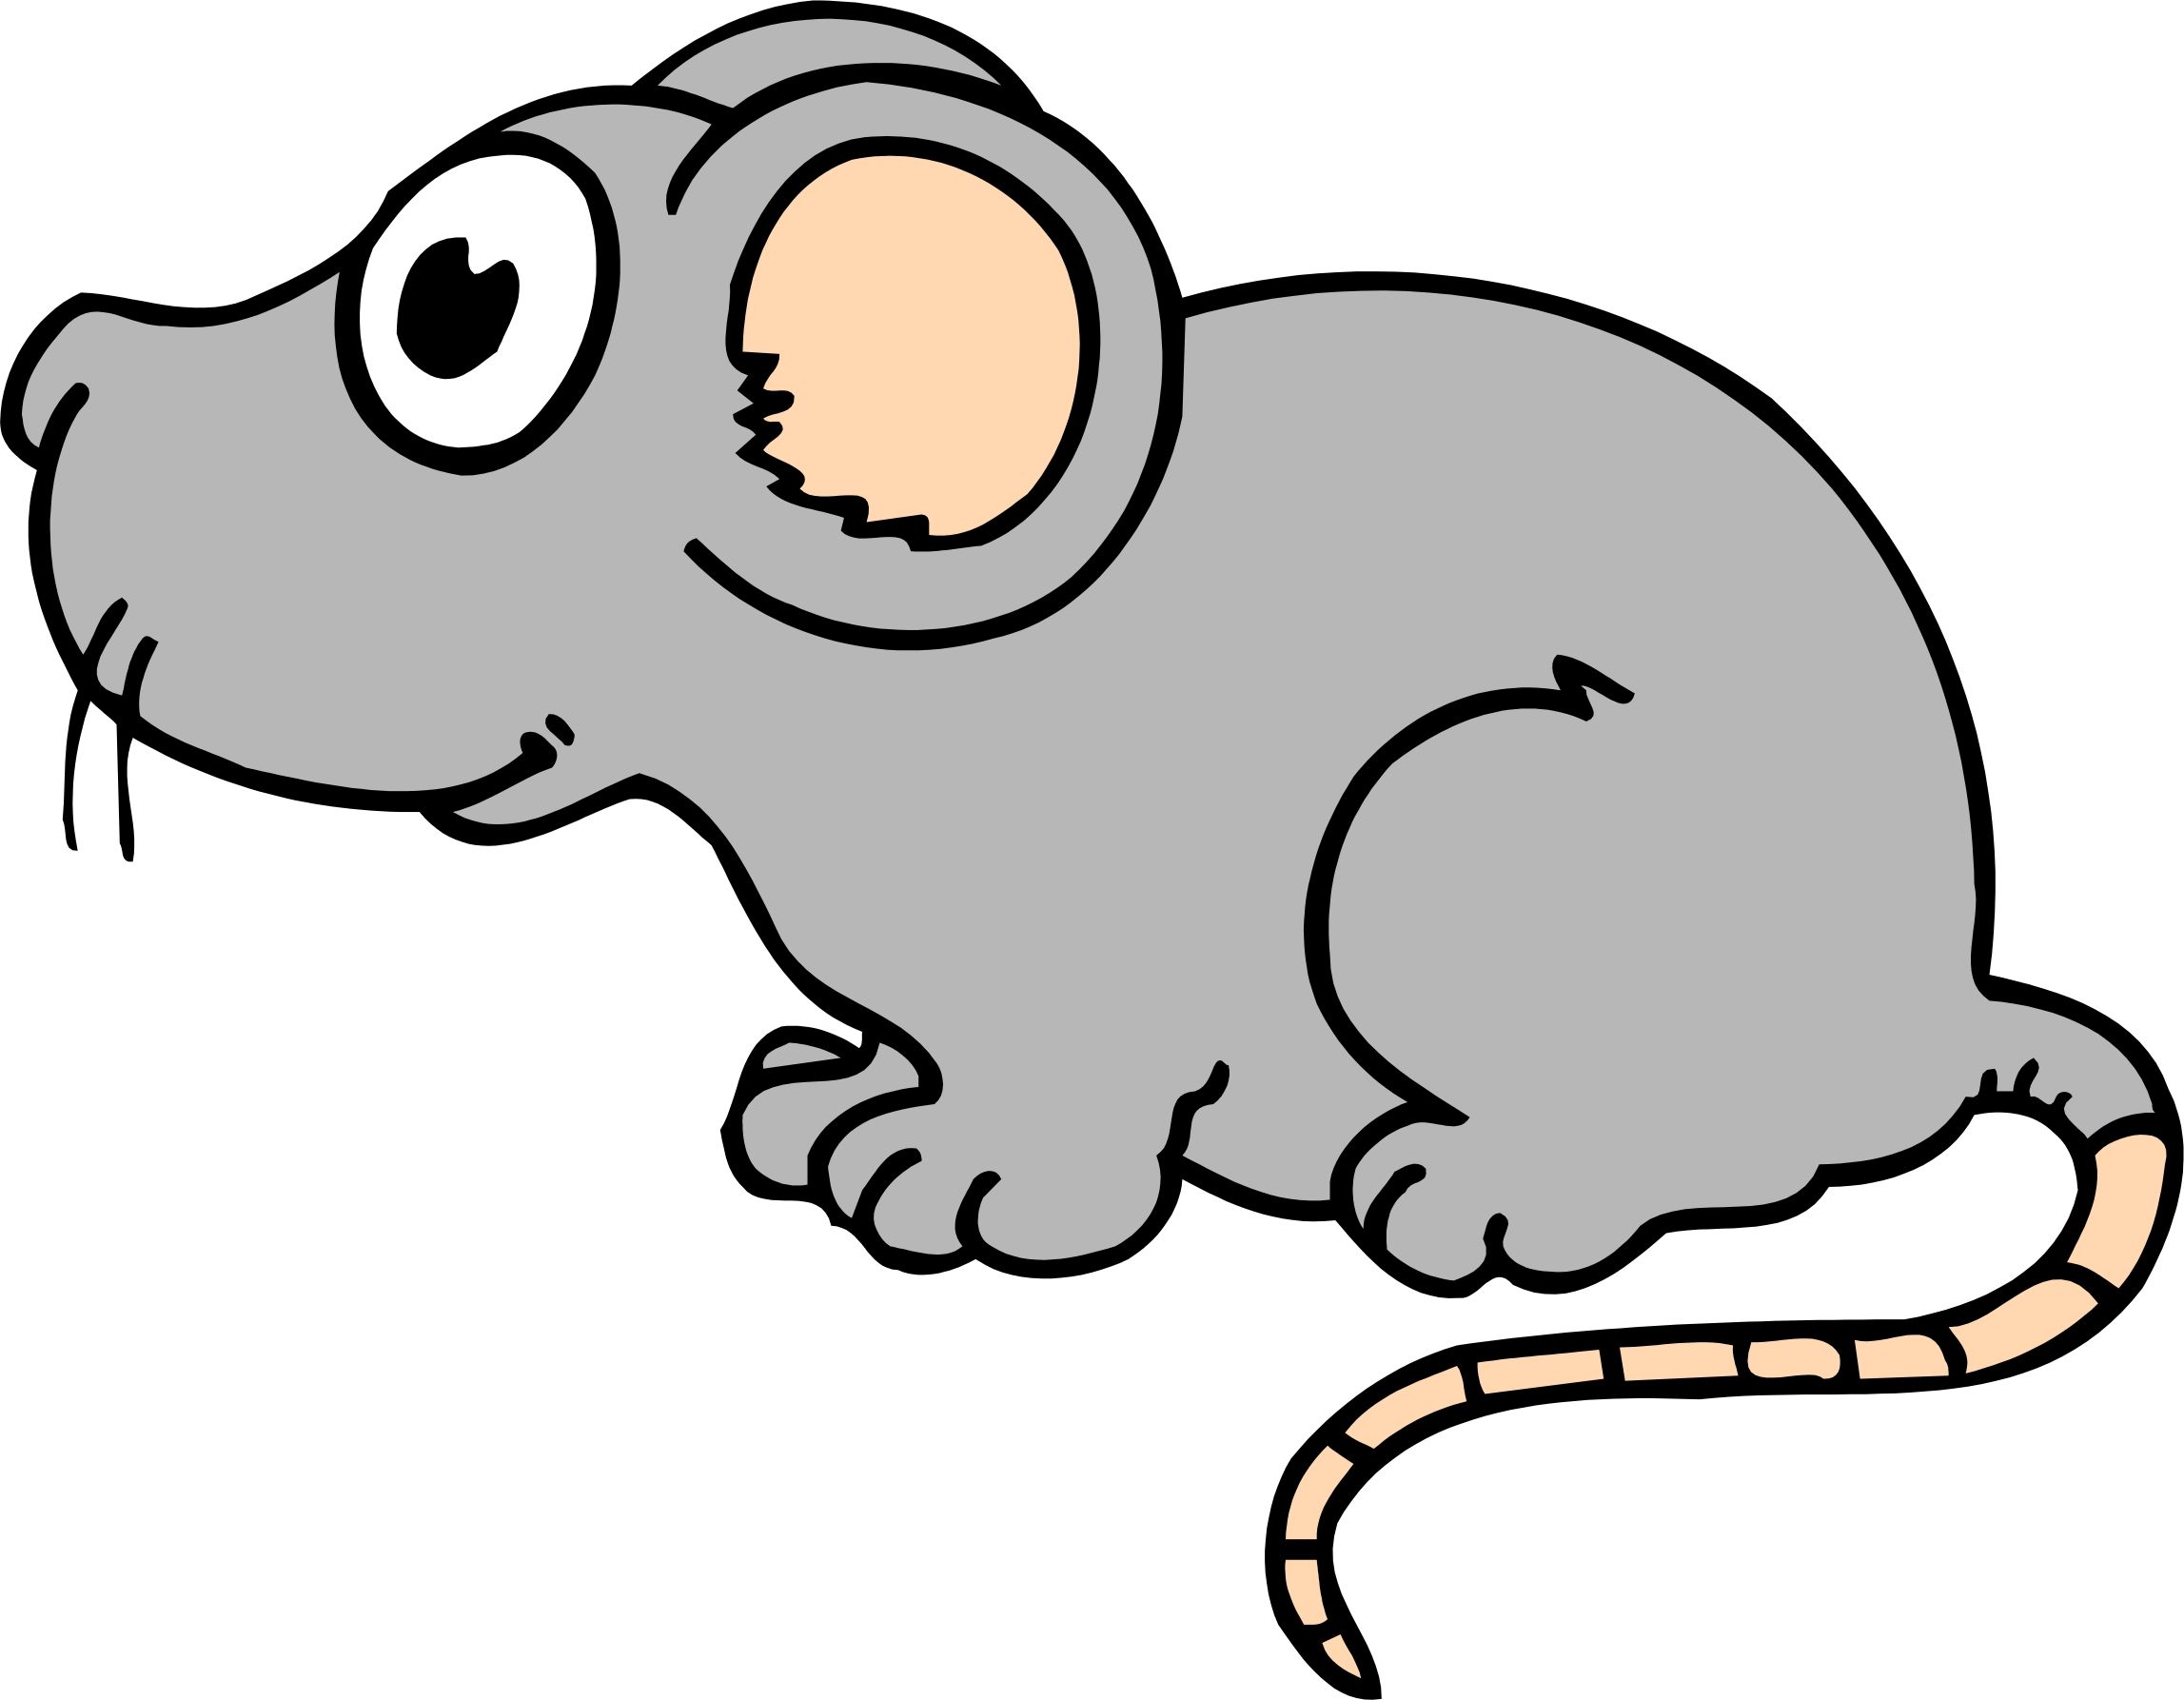 Free Picture Of Cartoon Mice, Download Free Clip Art, Free Clip Art on Clipart Library